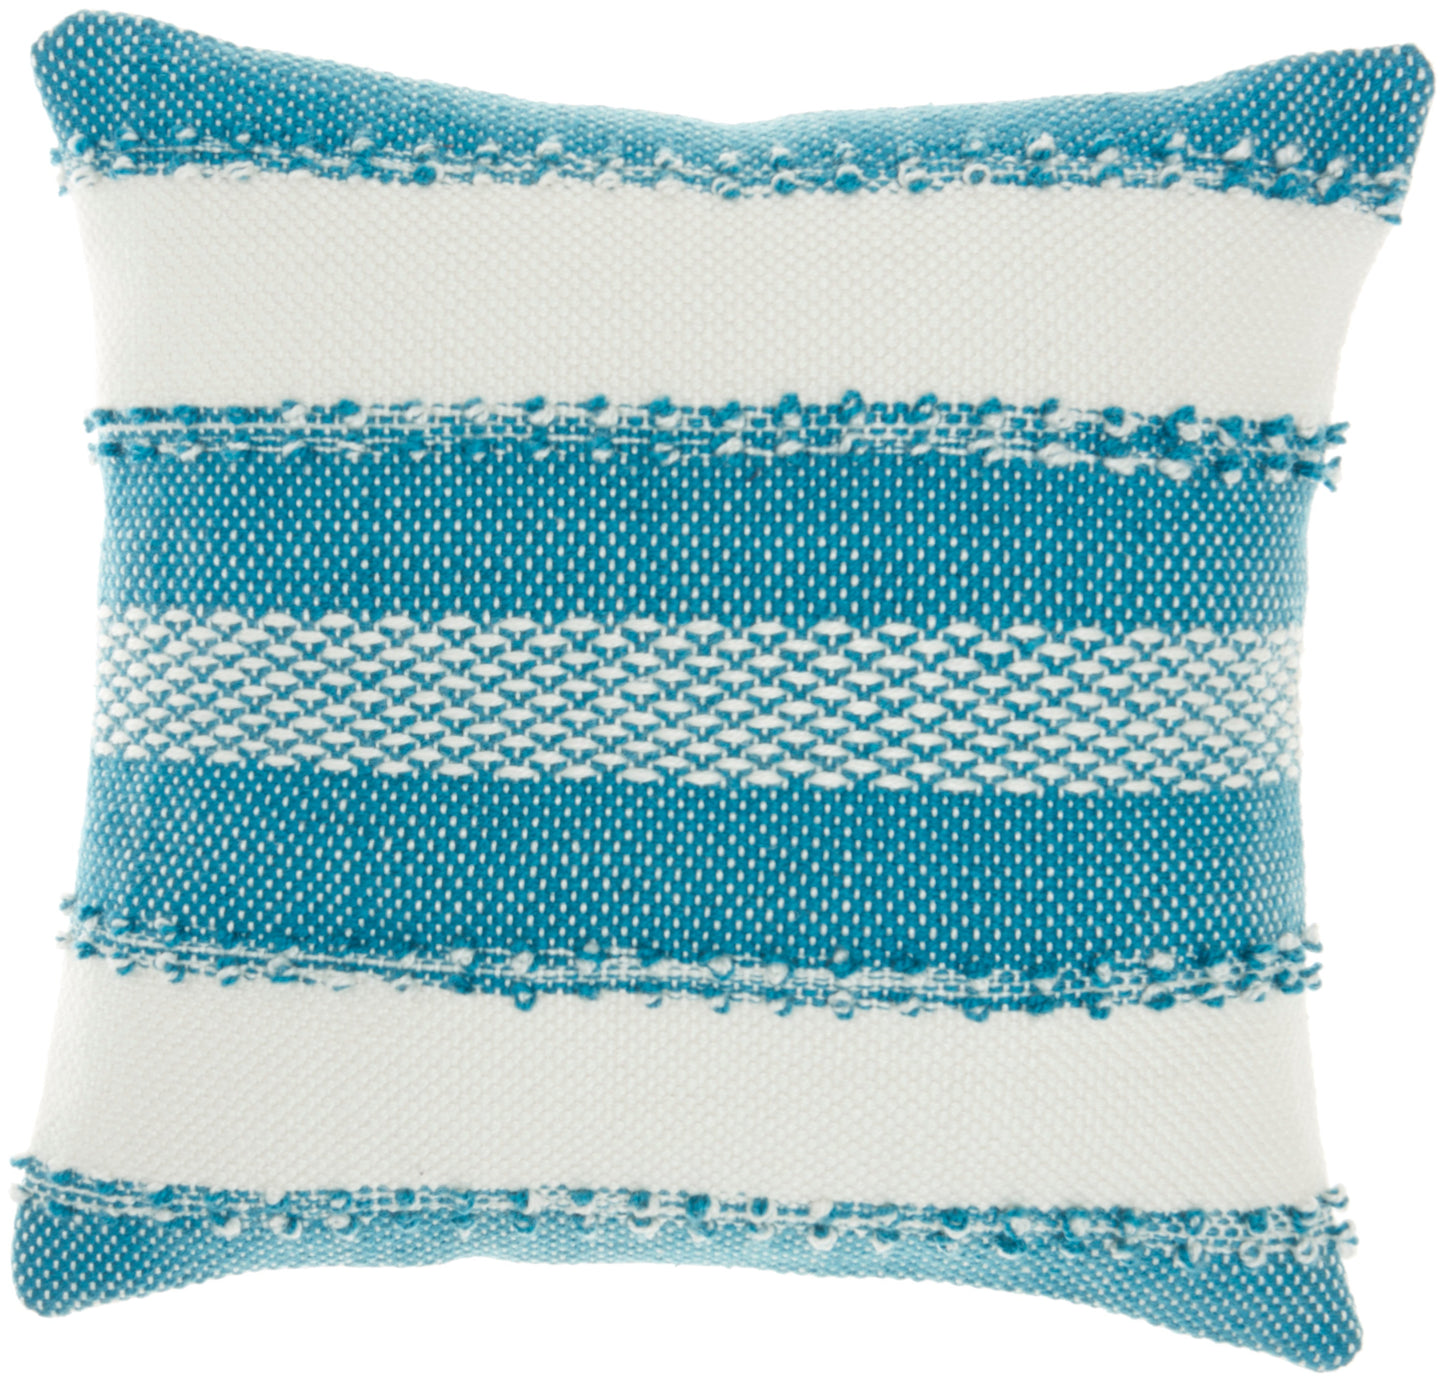 Outdoor Pillows VJ088 Synthetic Blend Woven Stripes & Dots Throw Pillow From Mina Victory By Nourison Rugs